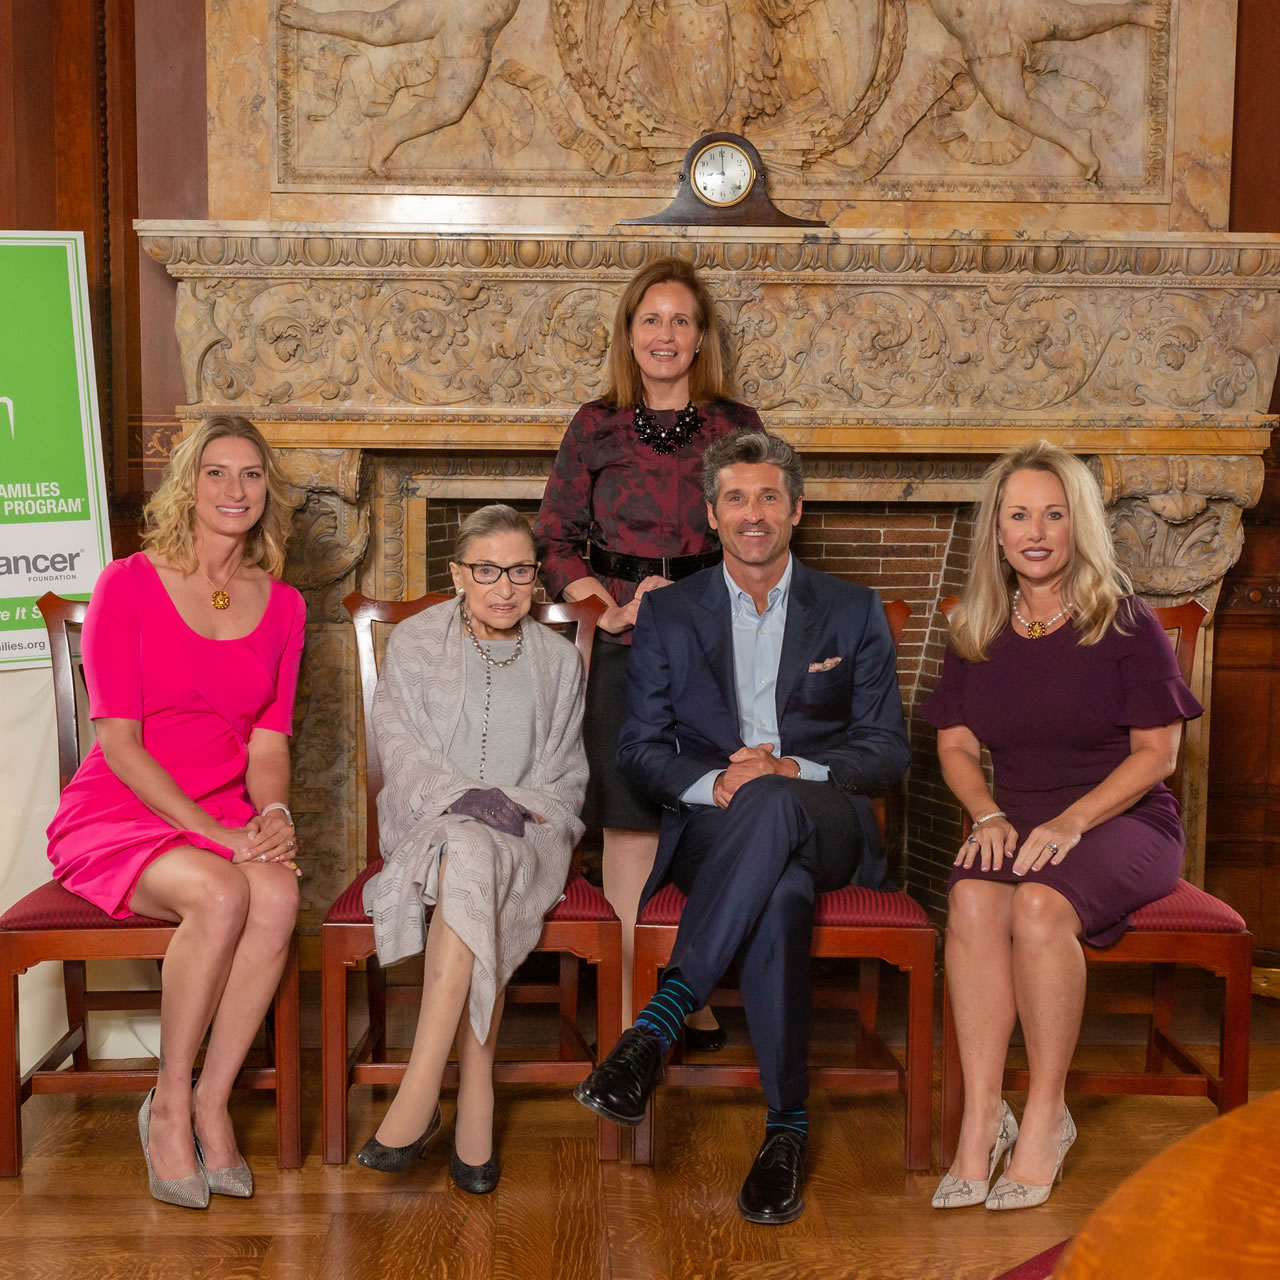 Ginsburg, Patrick Dempsey among honorees at Congressional Families Cancer Prevention Program